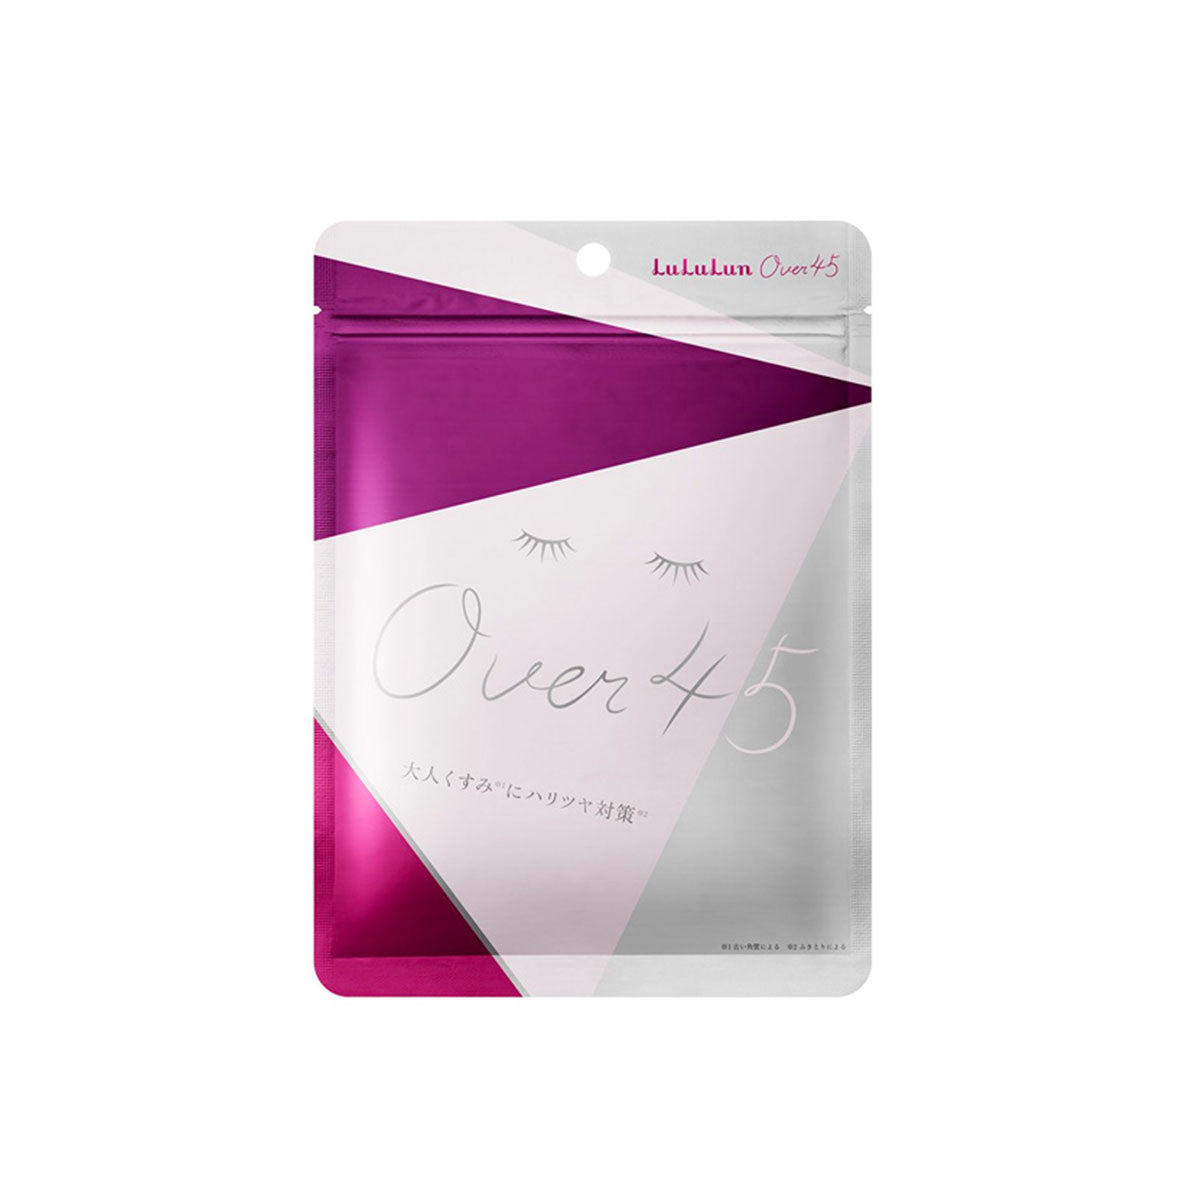 Over 45 Sheet Mask #Glowing And Smooth 7pcs